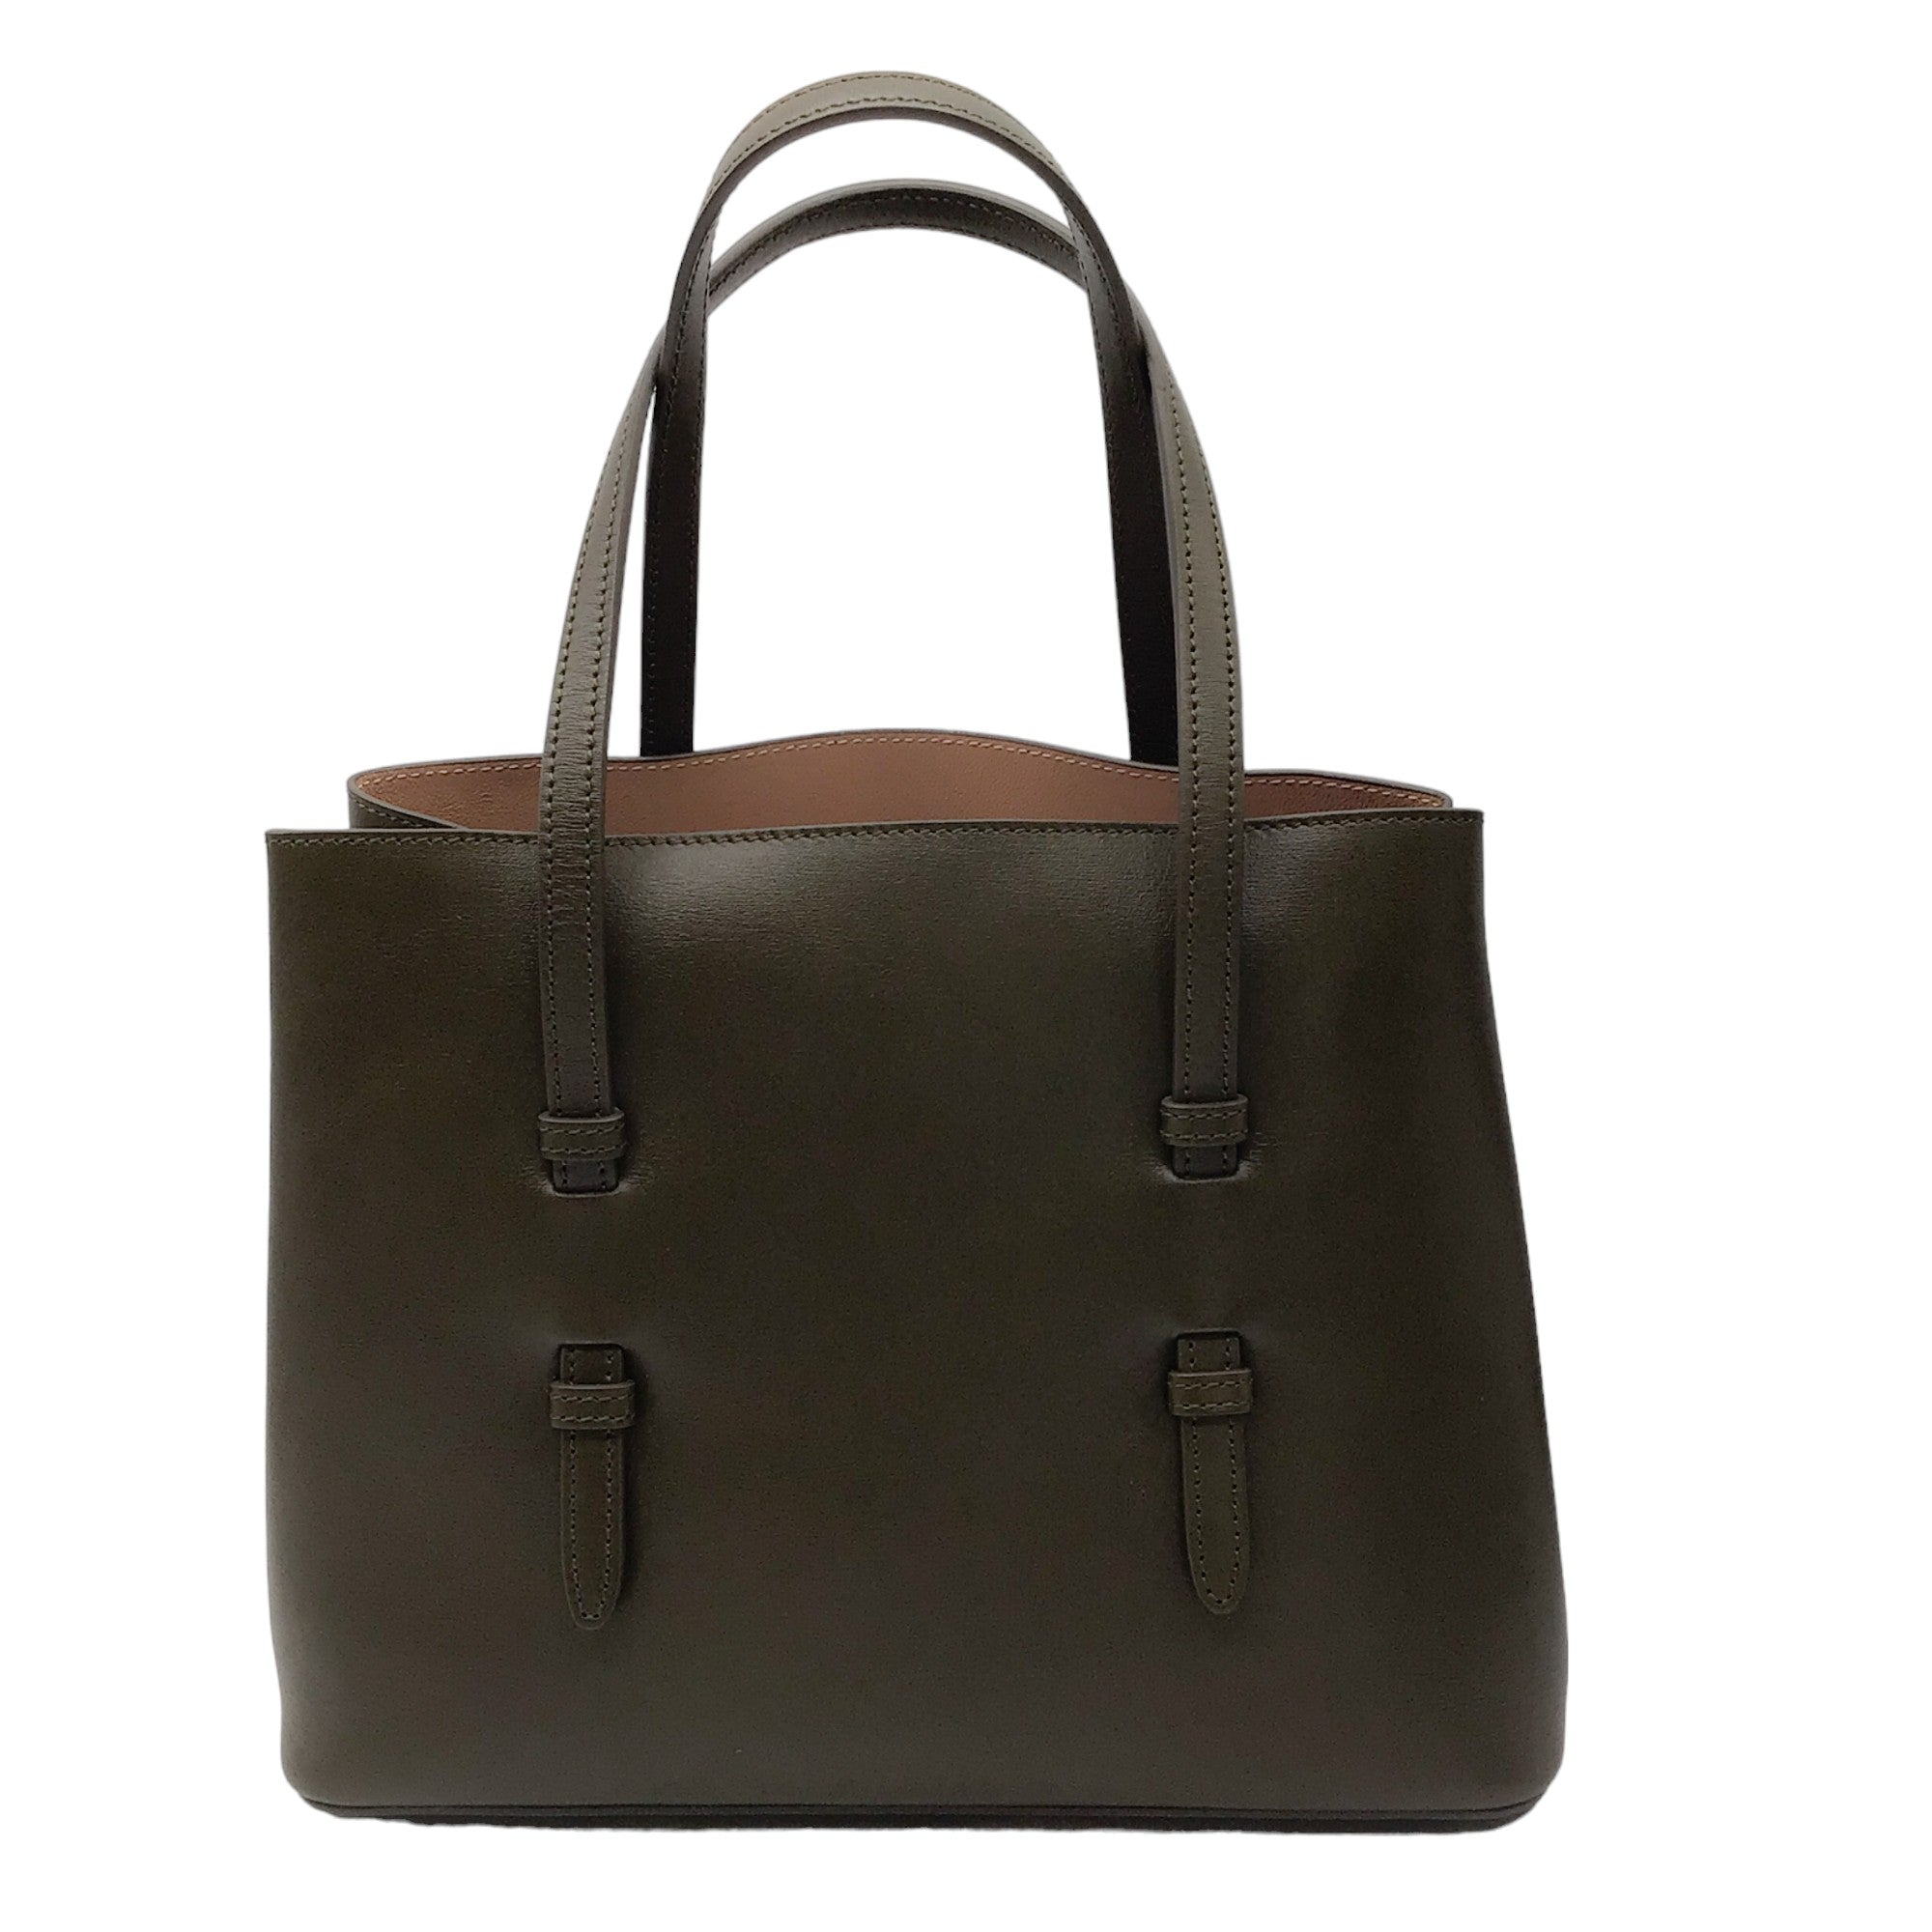 Alaia Olive Green Small Leather Tote Bag